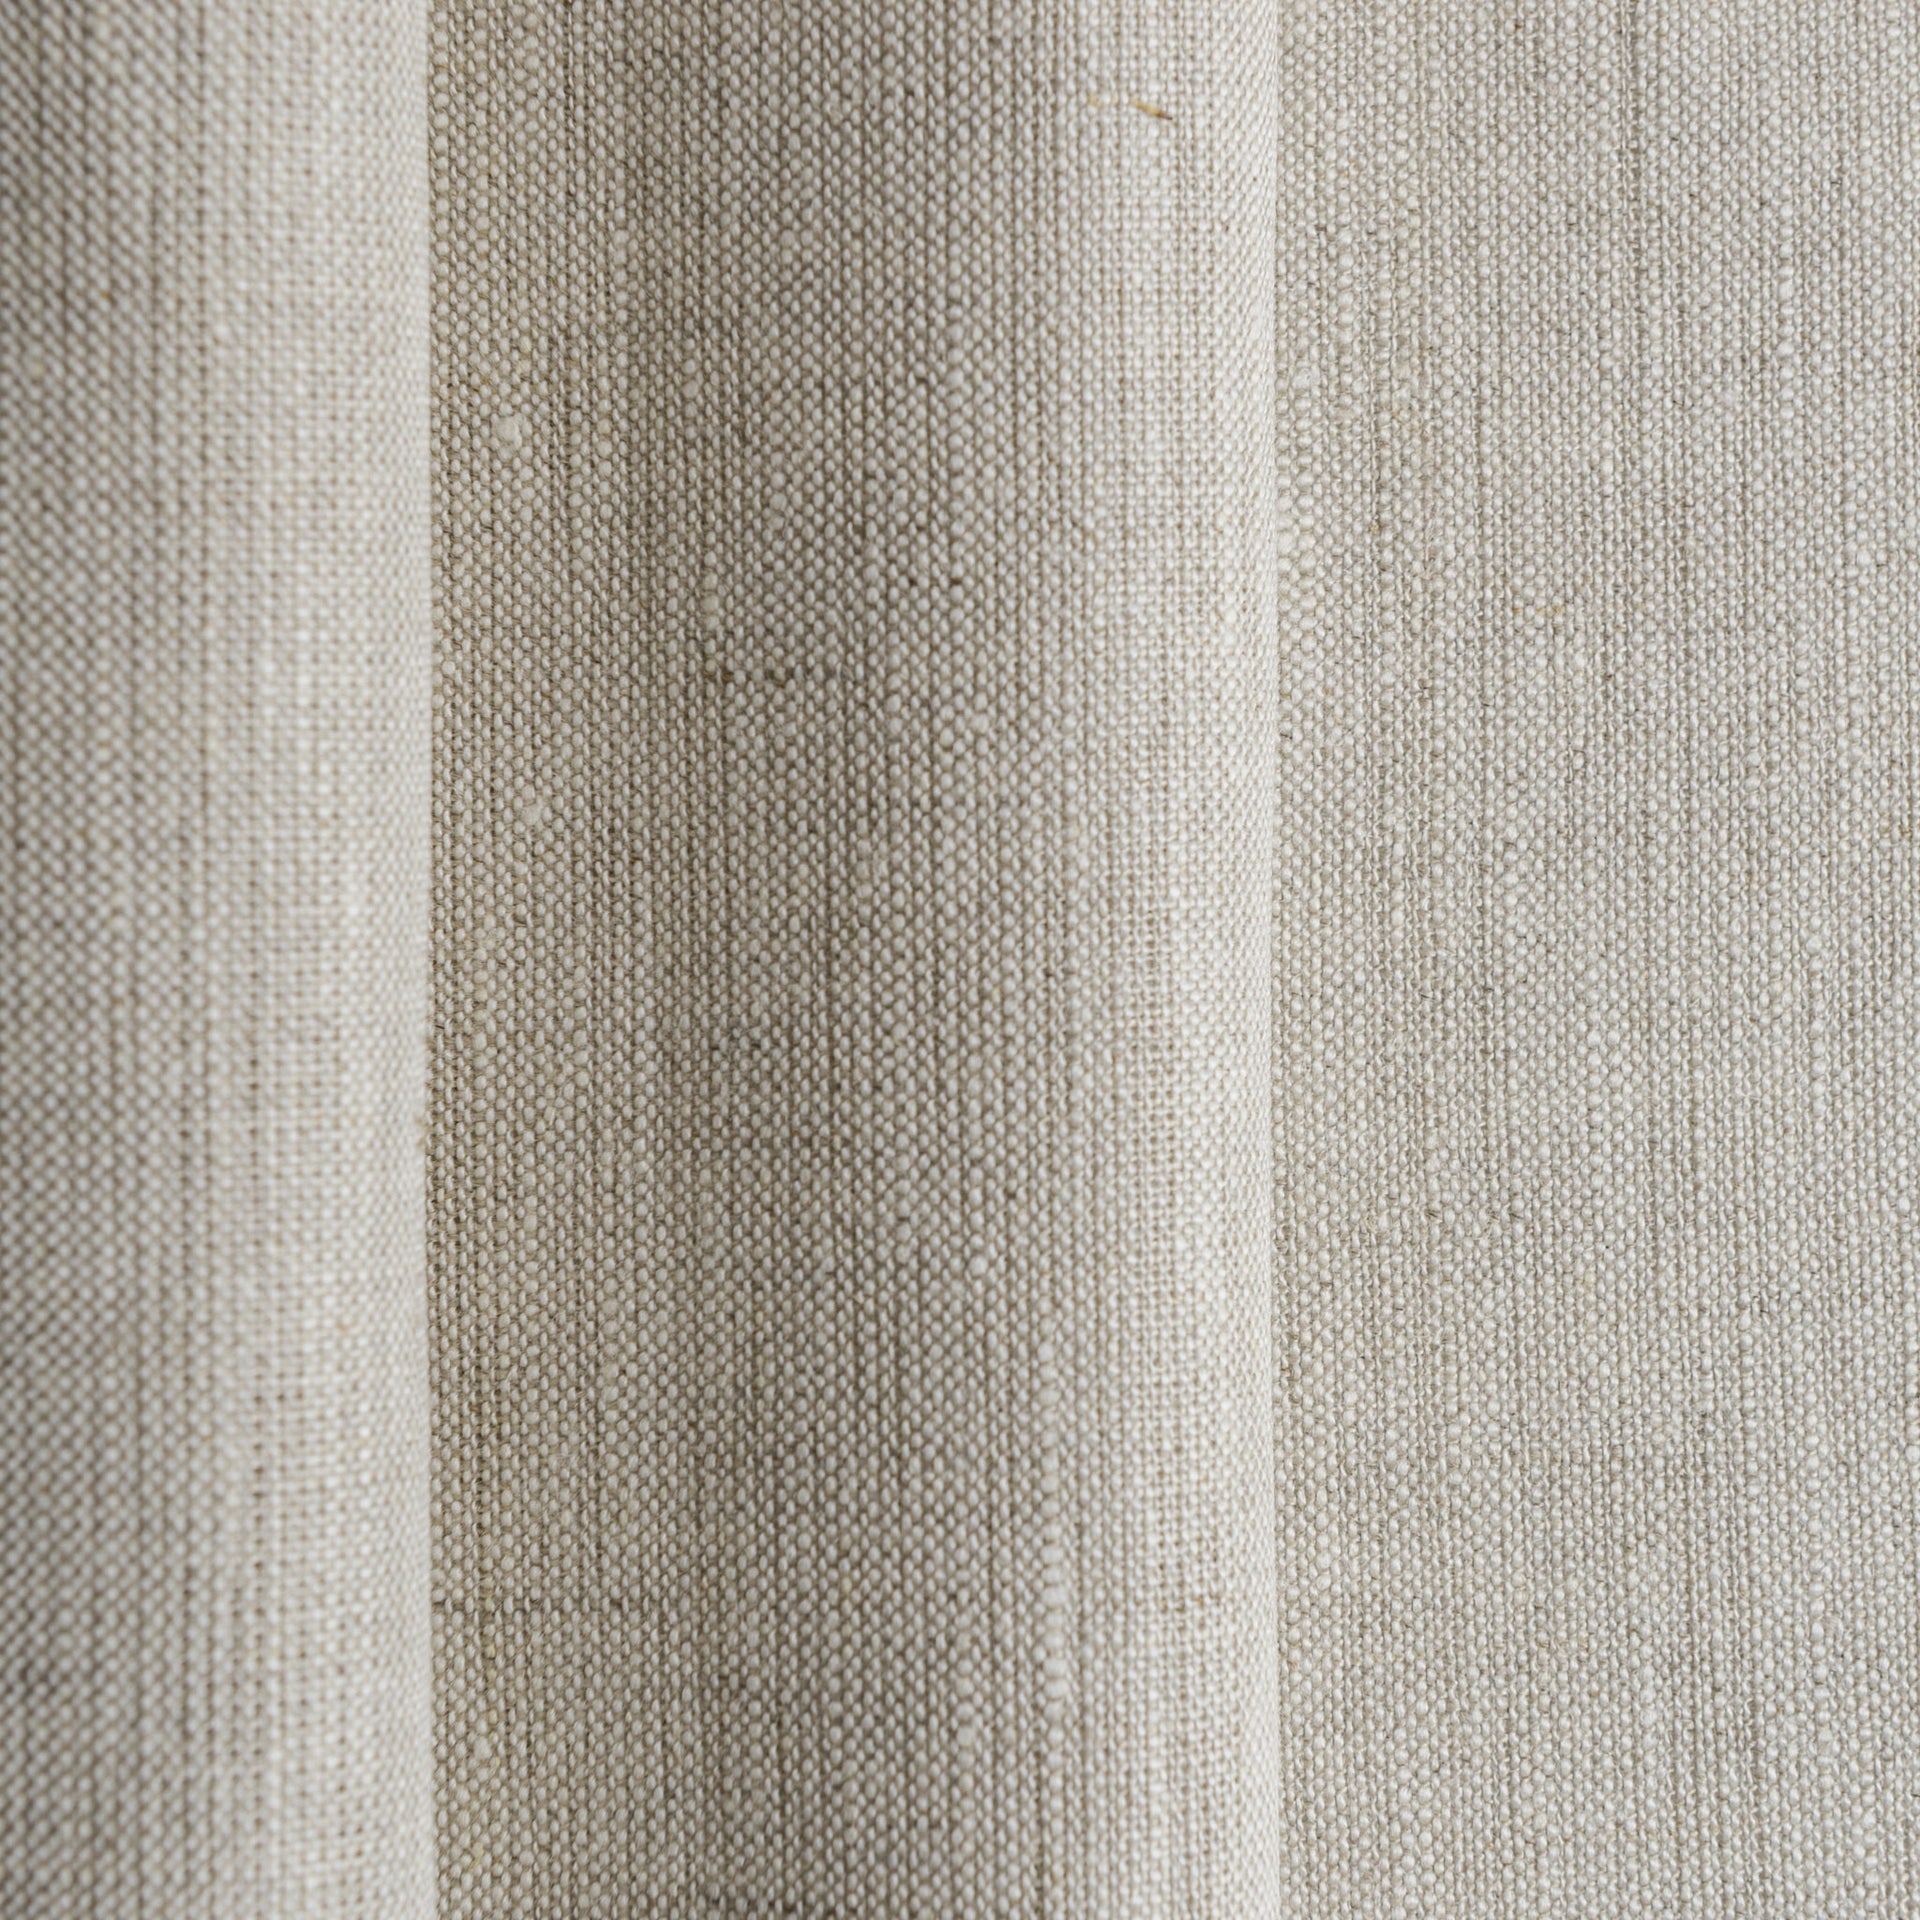 Natural Medium Weight Linen Fabric by the Meter - 100% French Natural - Width 133 cm, 267 cm